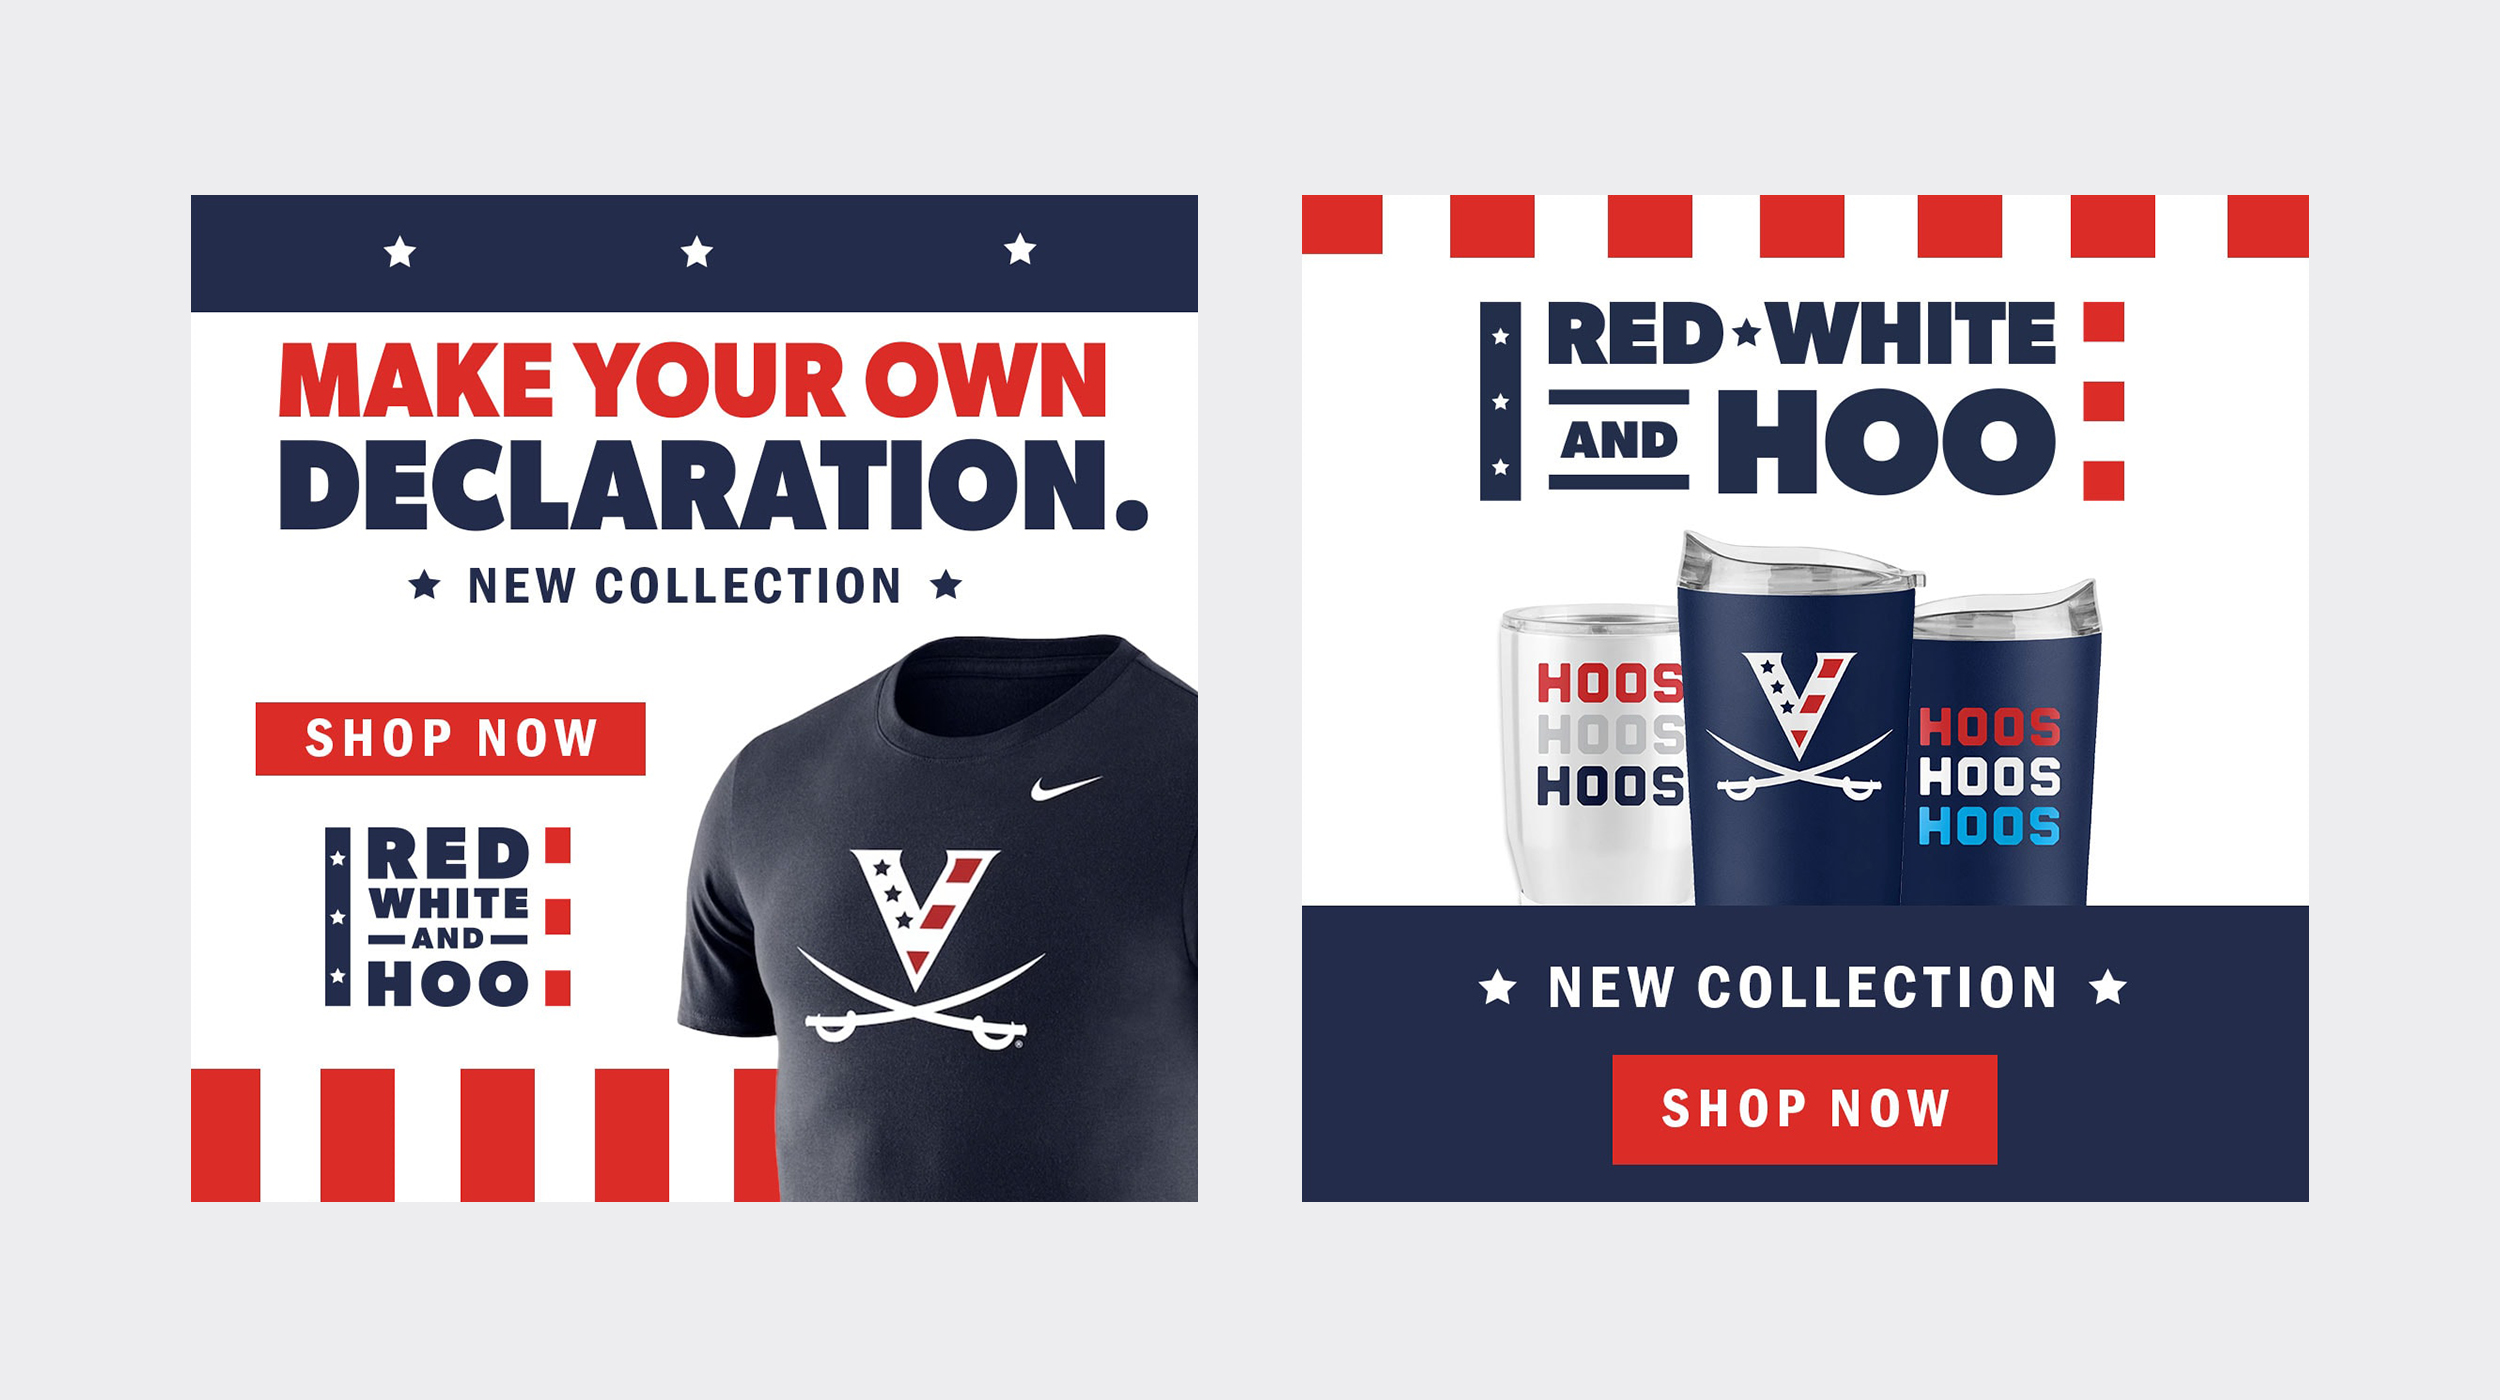 Square Red, White and Hoo ads